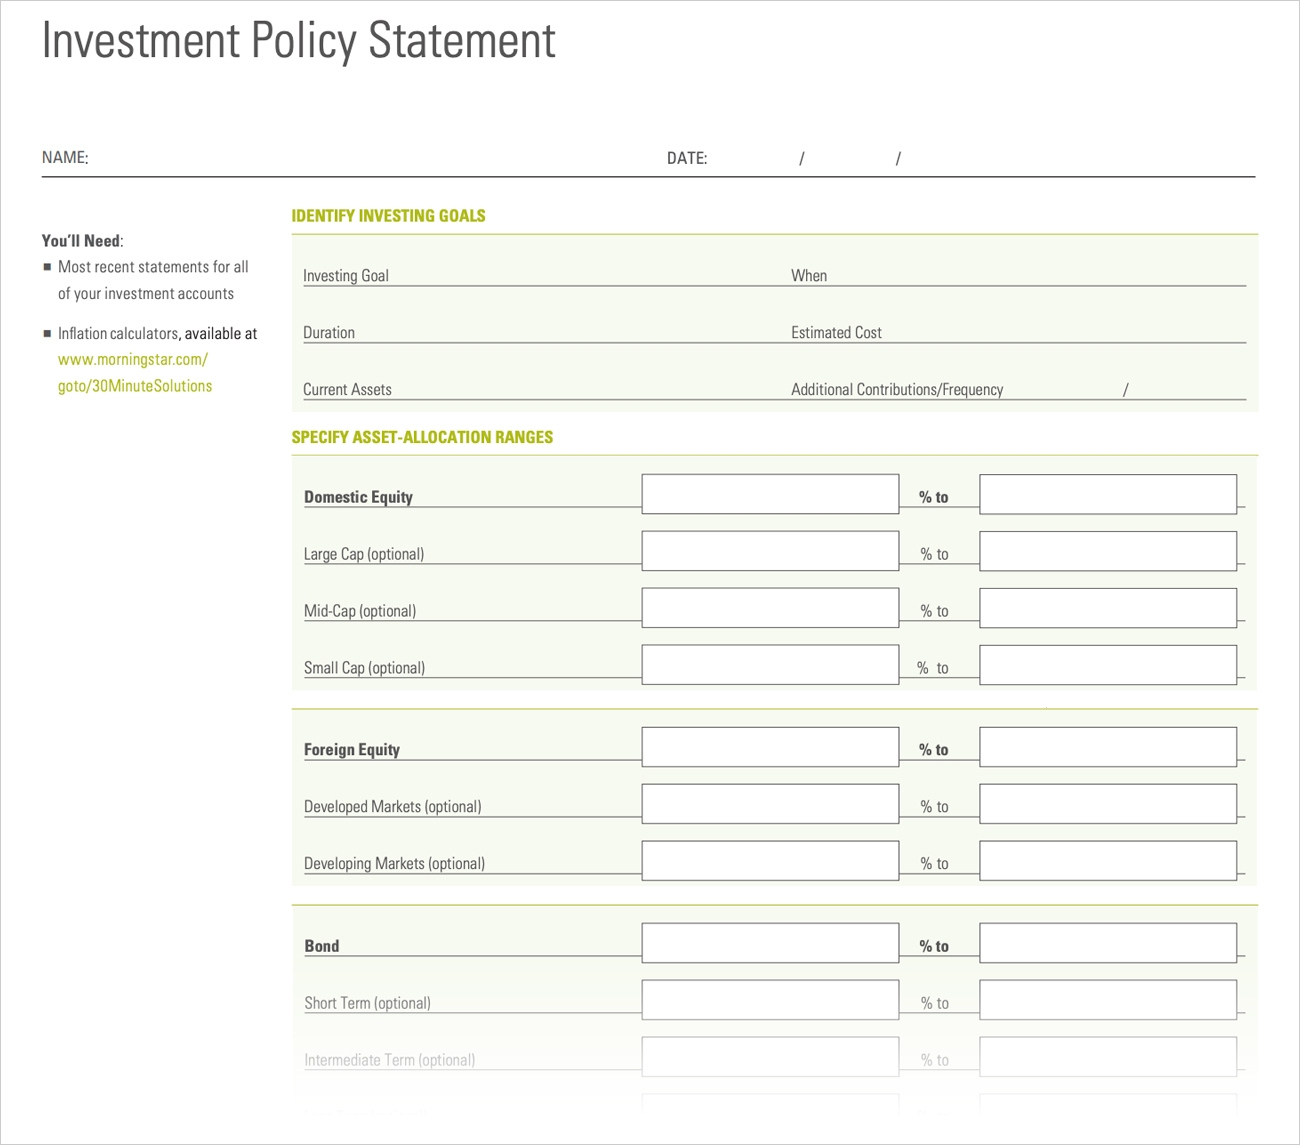 Stunning Investment Policy Statement Template For Individuals for Investment Policy Statement Template